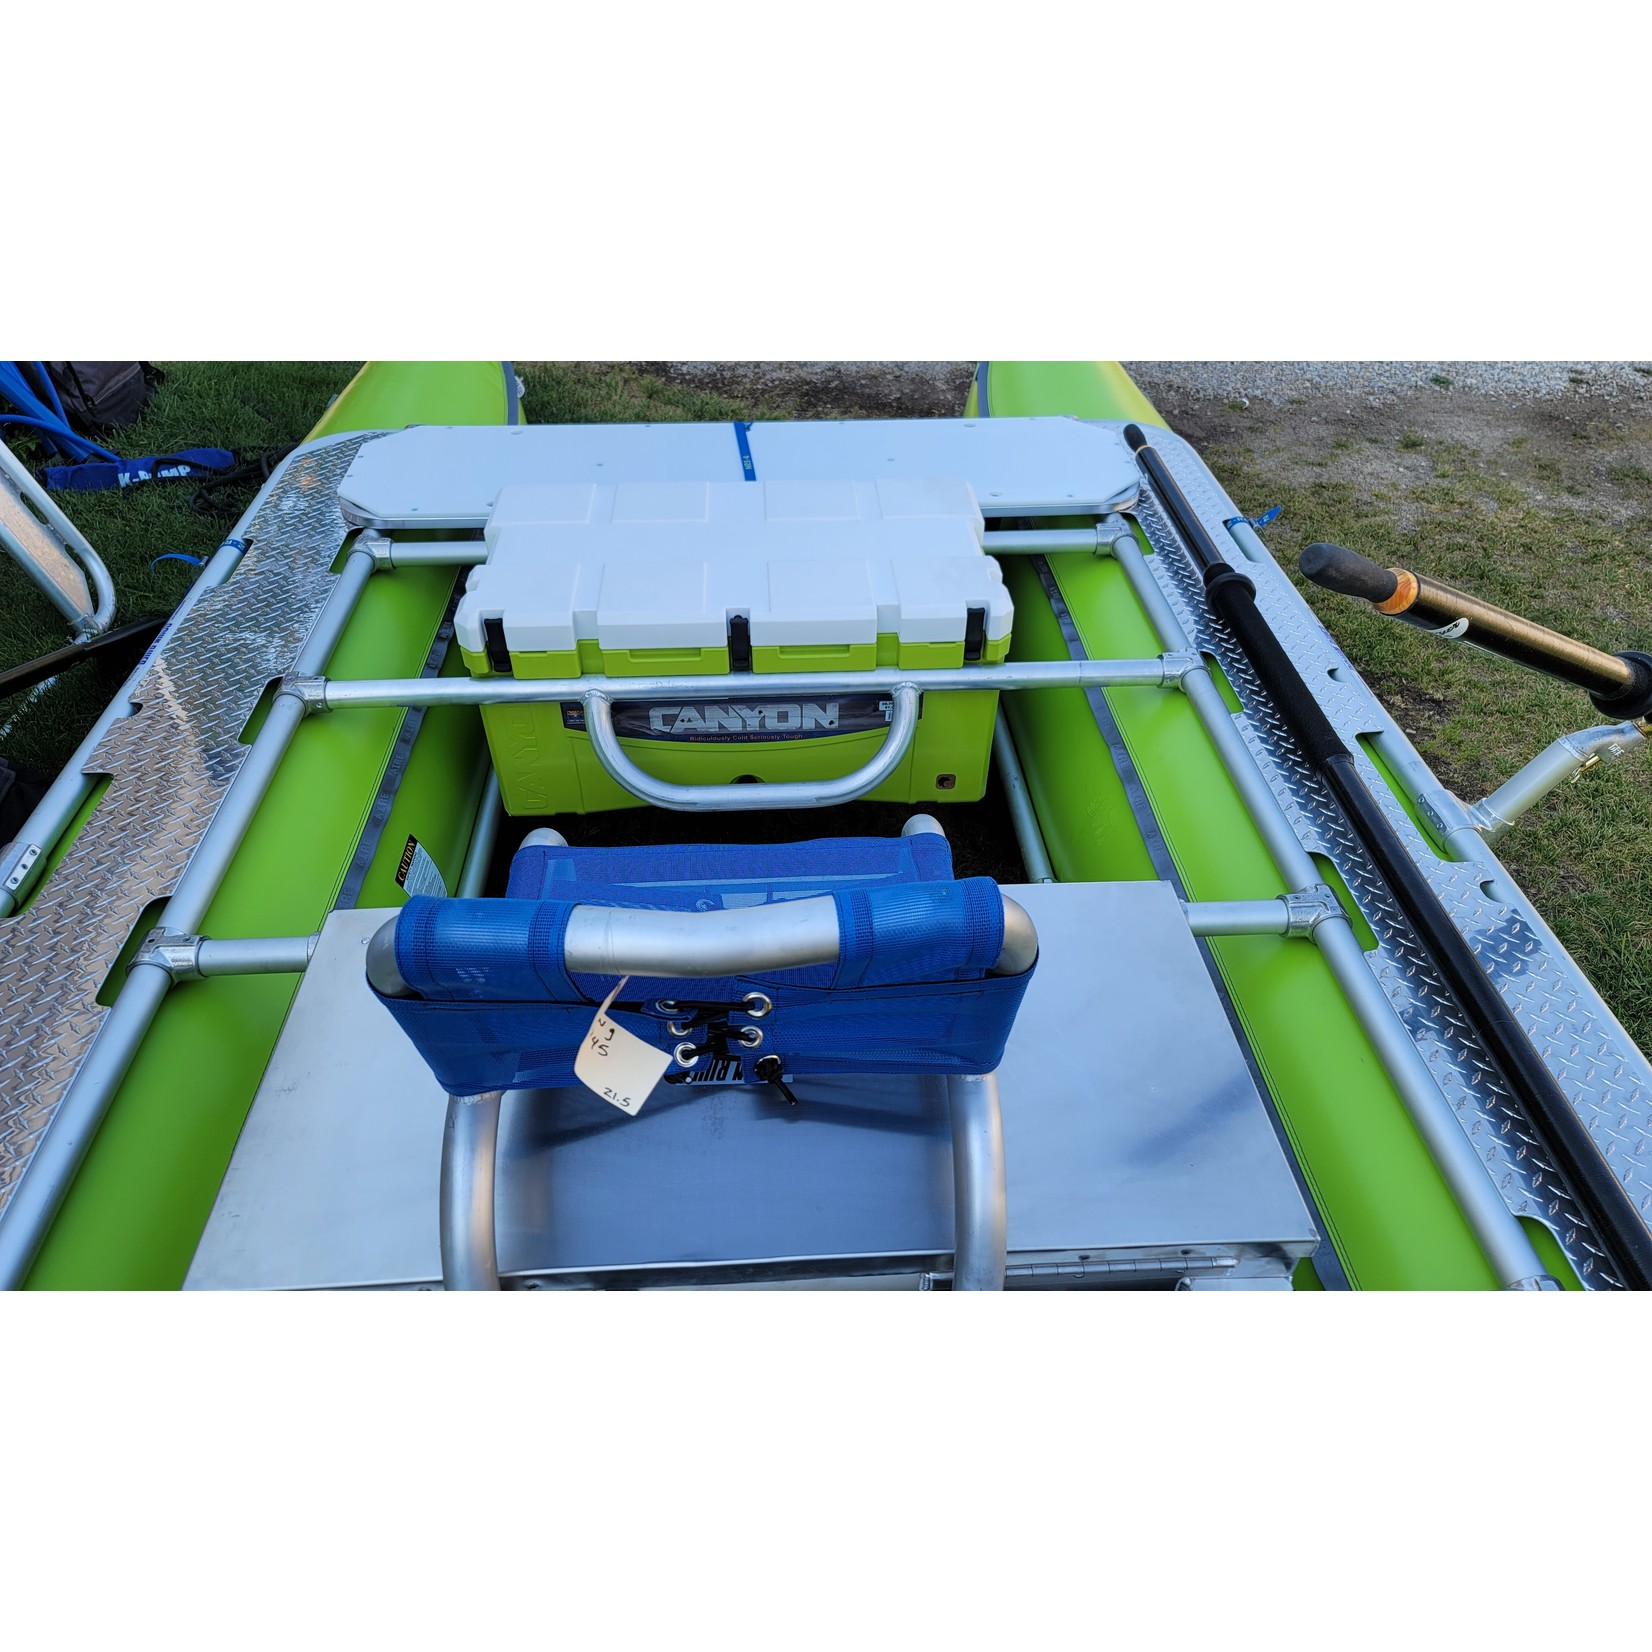 AIRE AIRE Lion 16 Cataraft Package